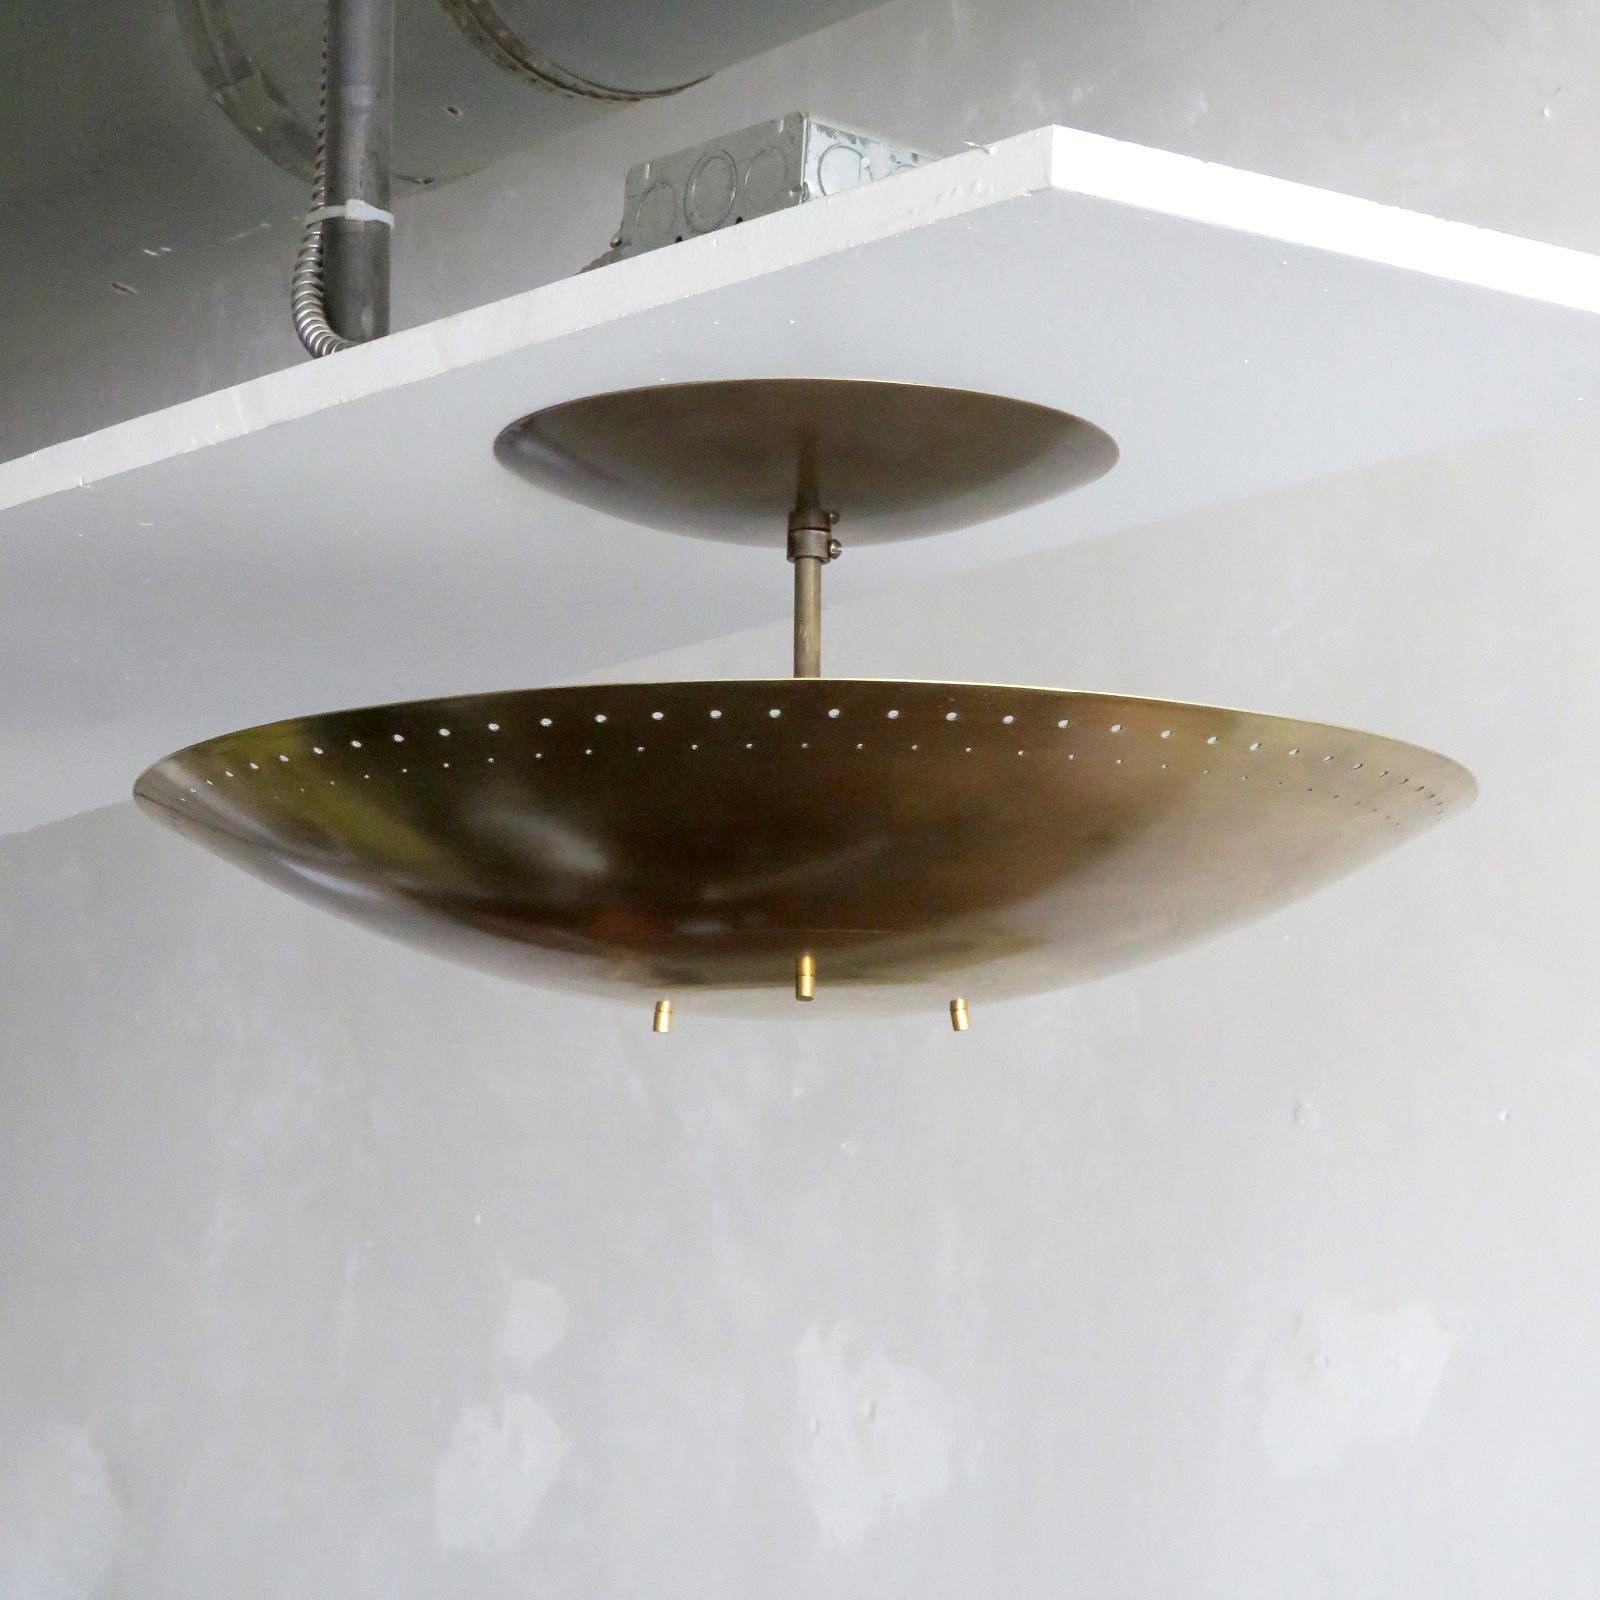 Elegant ceiling flushmount light Utah-18 designed by Gallery L7, handcrafted and finished in Los Angeles from American brass, suspended perforated raw, aged brass disc (18inch diameter). Six E12 sockets per fixture, max. wattage 60w each, wired for